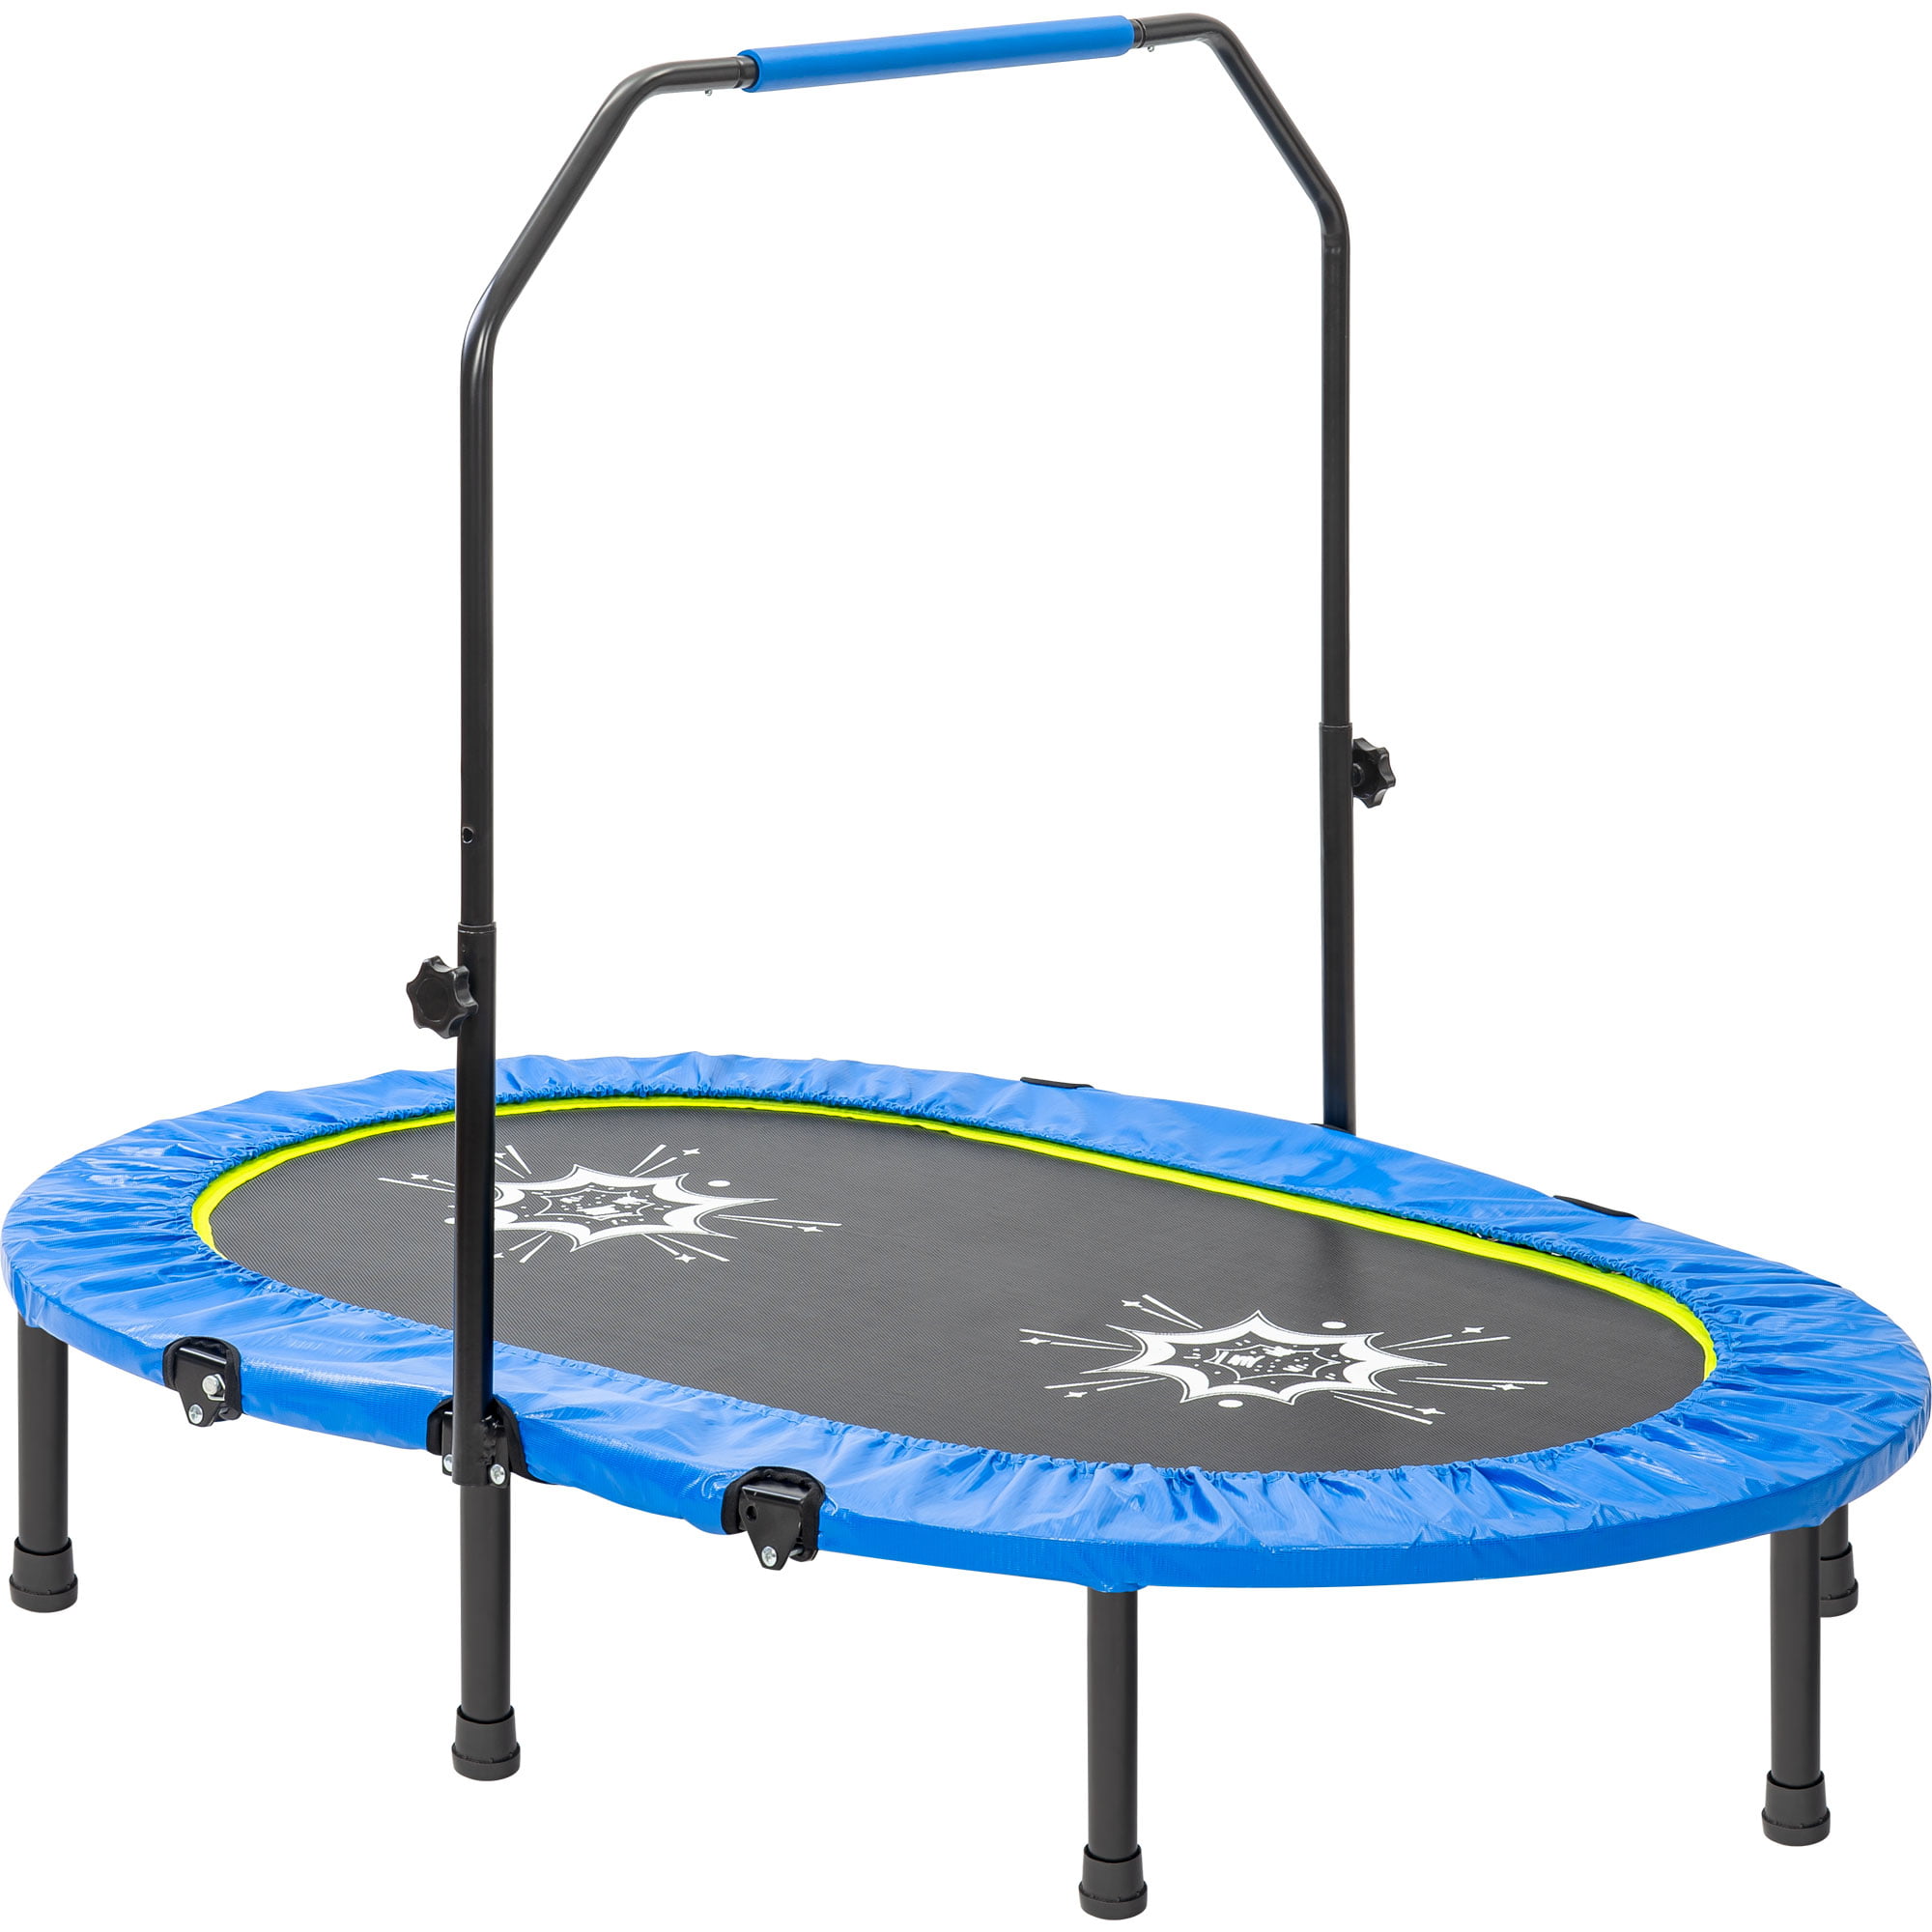 Parent-Child Trampoline Merax Mini Rebounder Trampoline with Handle for Two Kids 